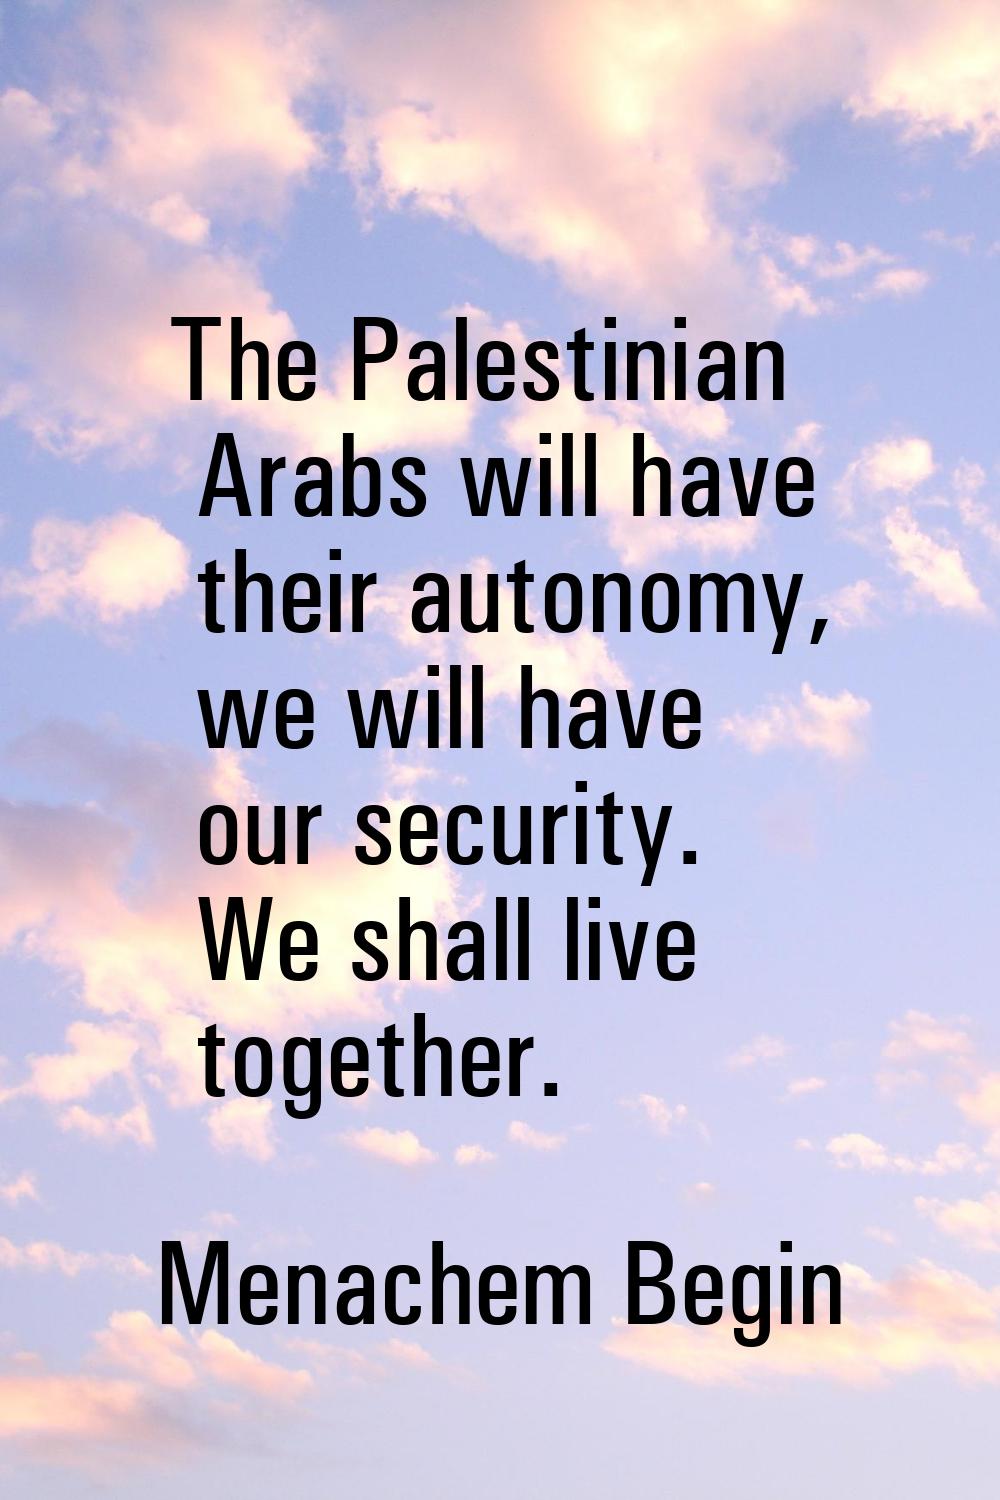 The Palestinian Arabs will have their autonomy, we will have our security. We shall live together.